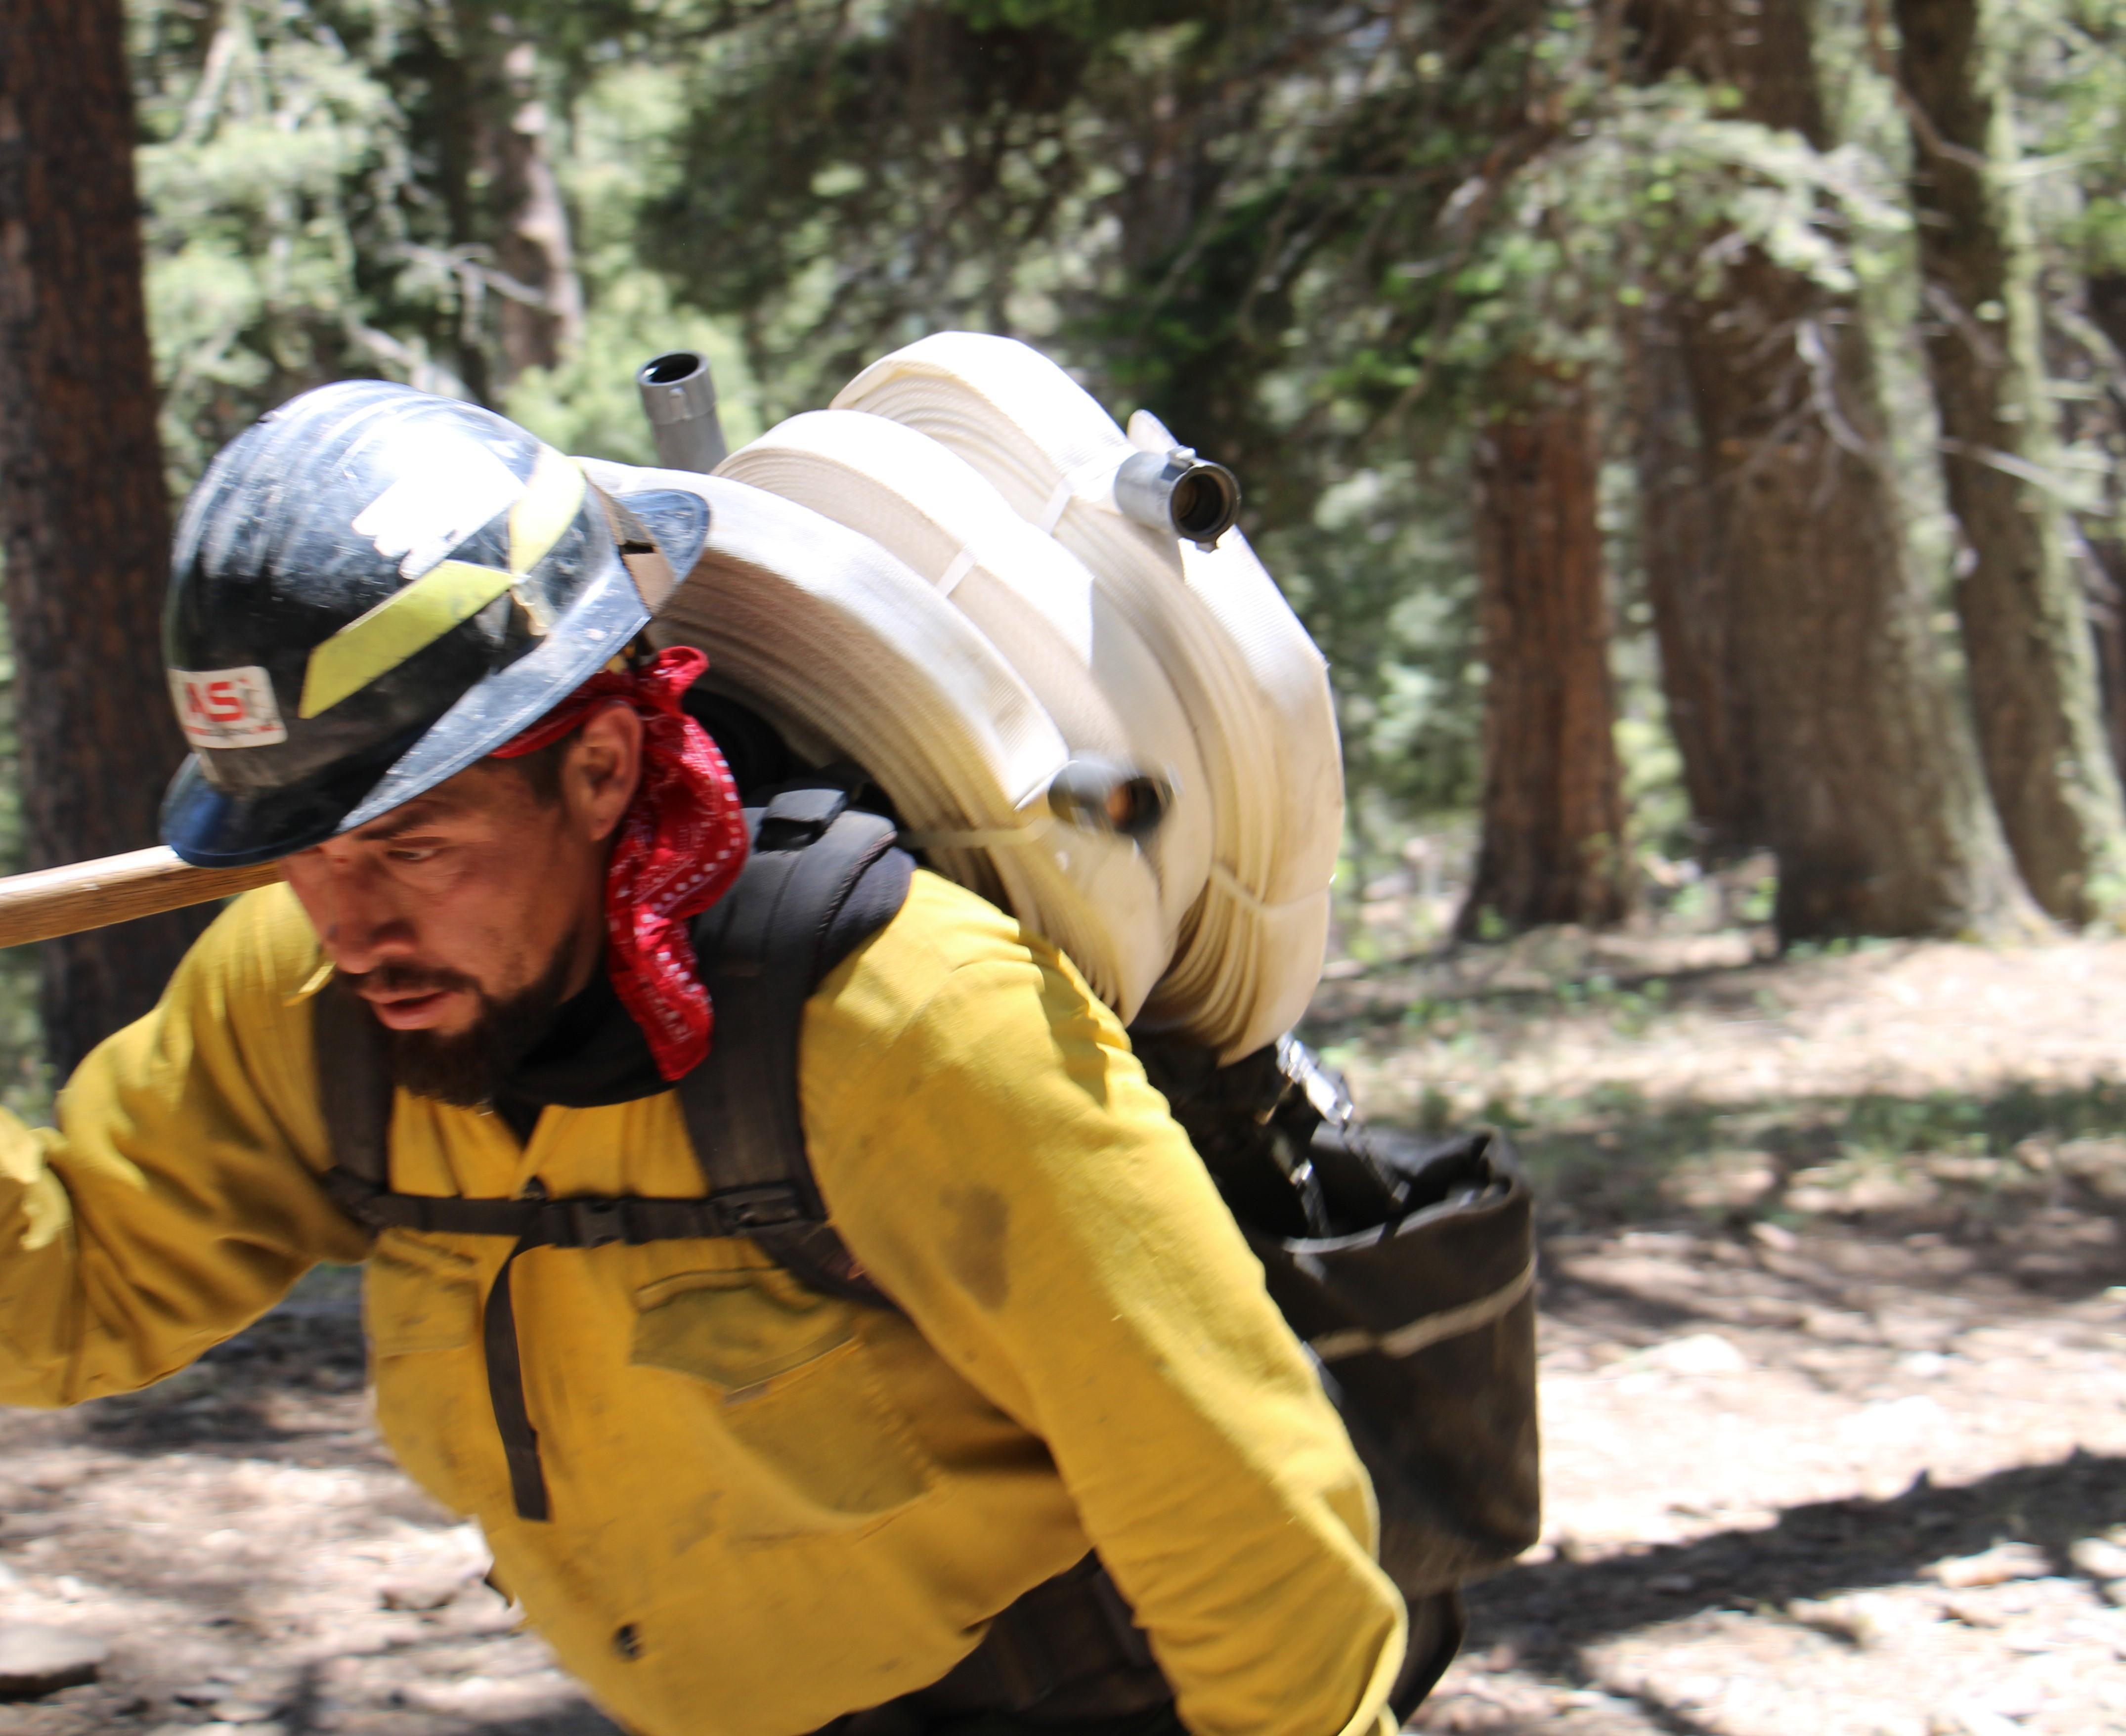 a firefighter in a yellow shirt carries a roll of hose on his shoulder